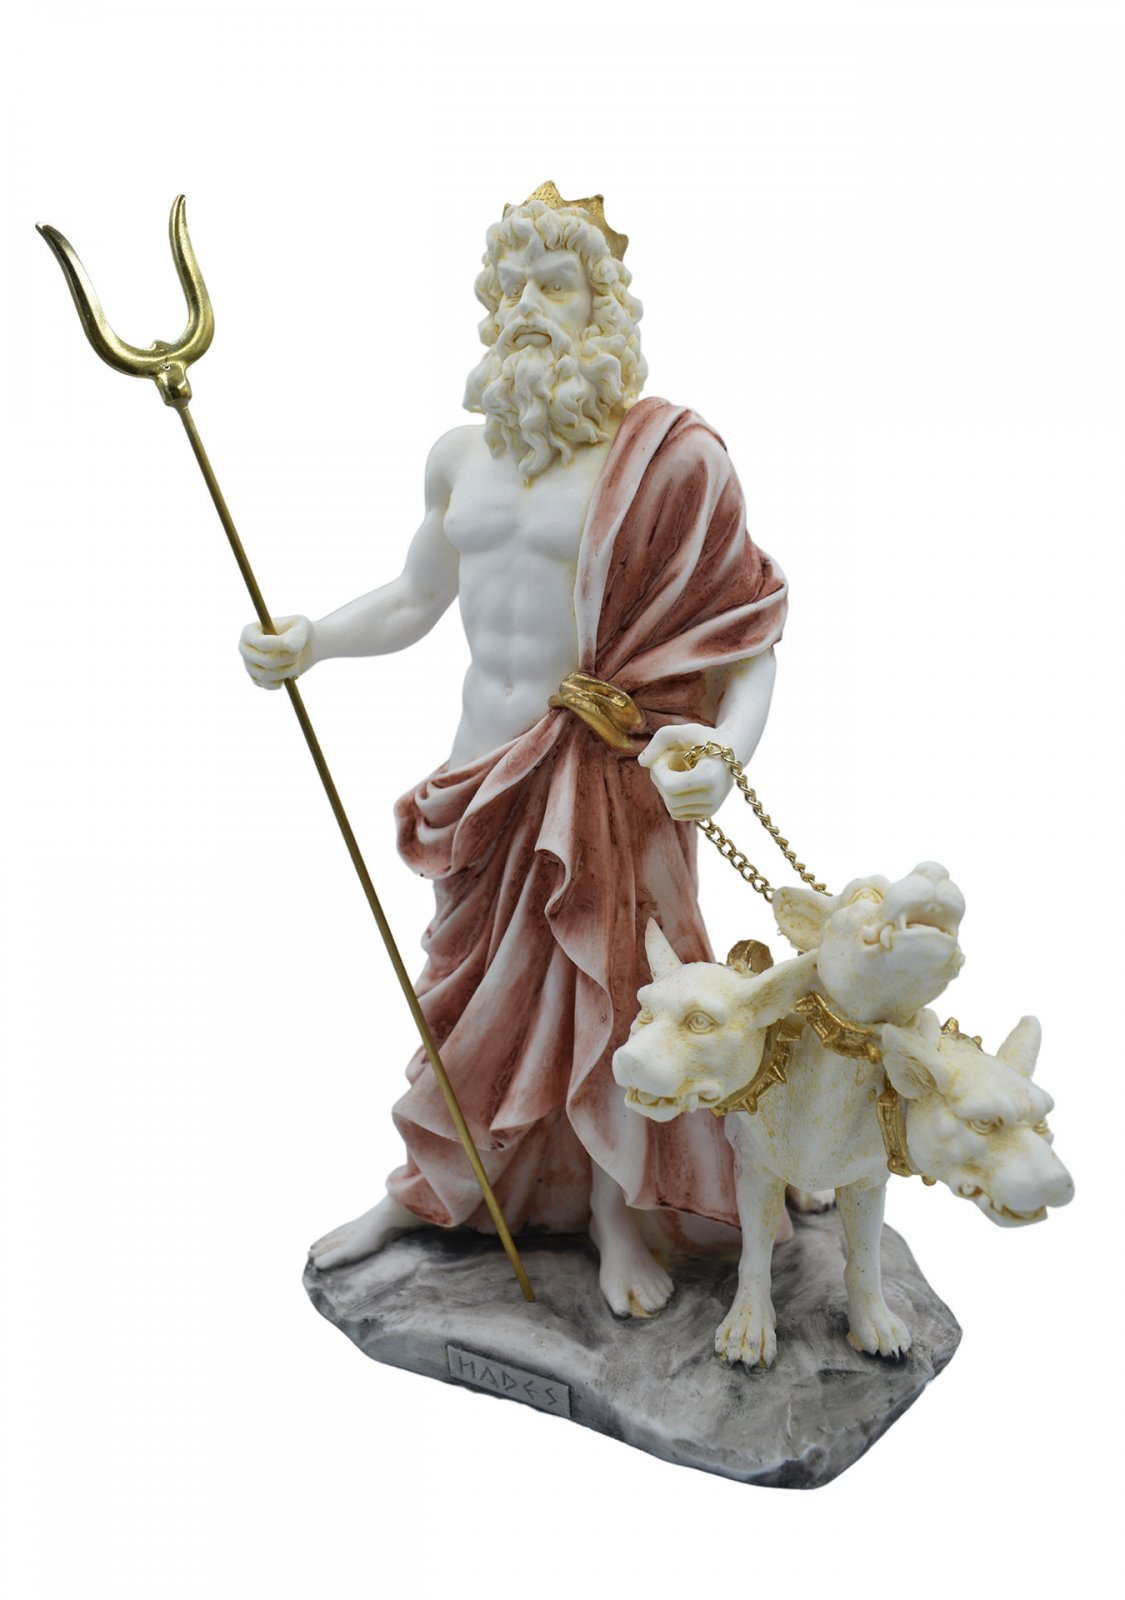 Hades, Pluto, God of the dead and the king of the underworld, greek alabaster statue with color